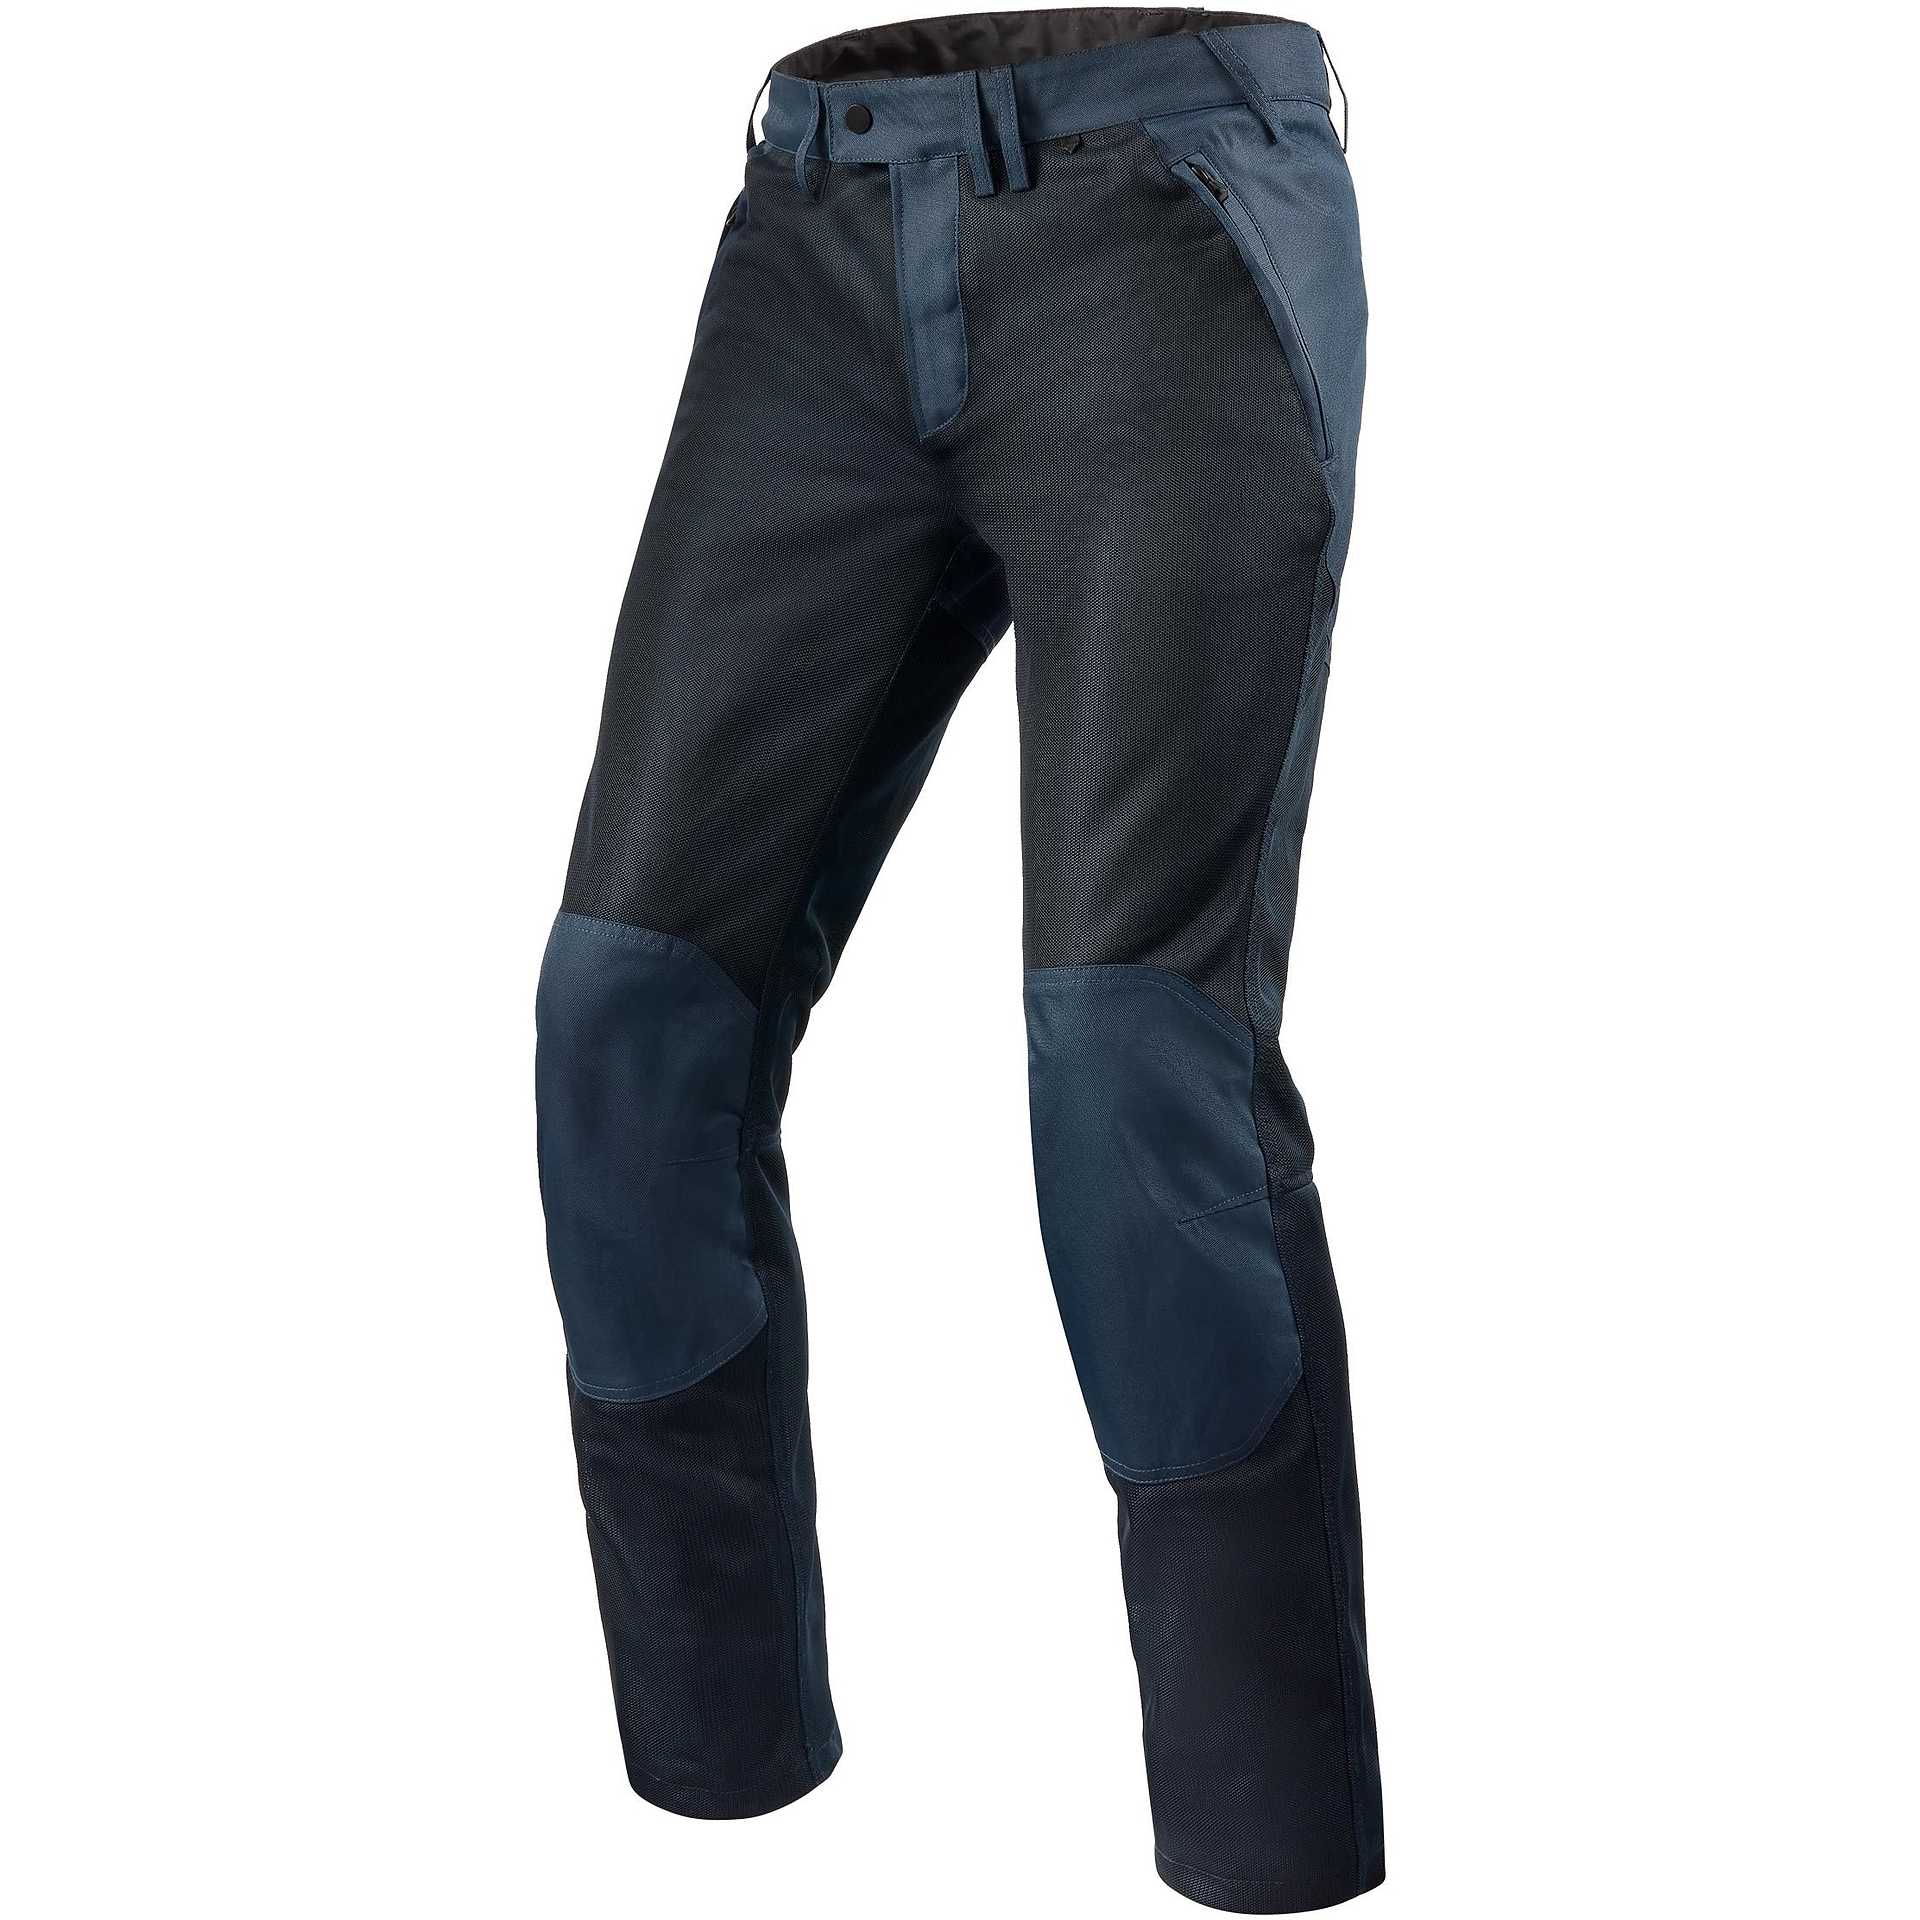 Men Motorcycle Genuine Leather Pants | Leather Motorcycle Trousers Sale -  Motorcycle - Aliexpress